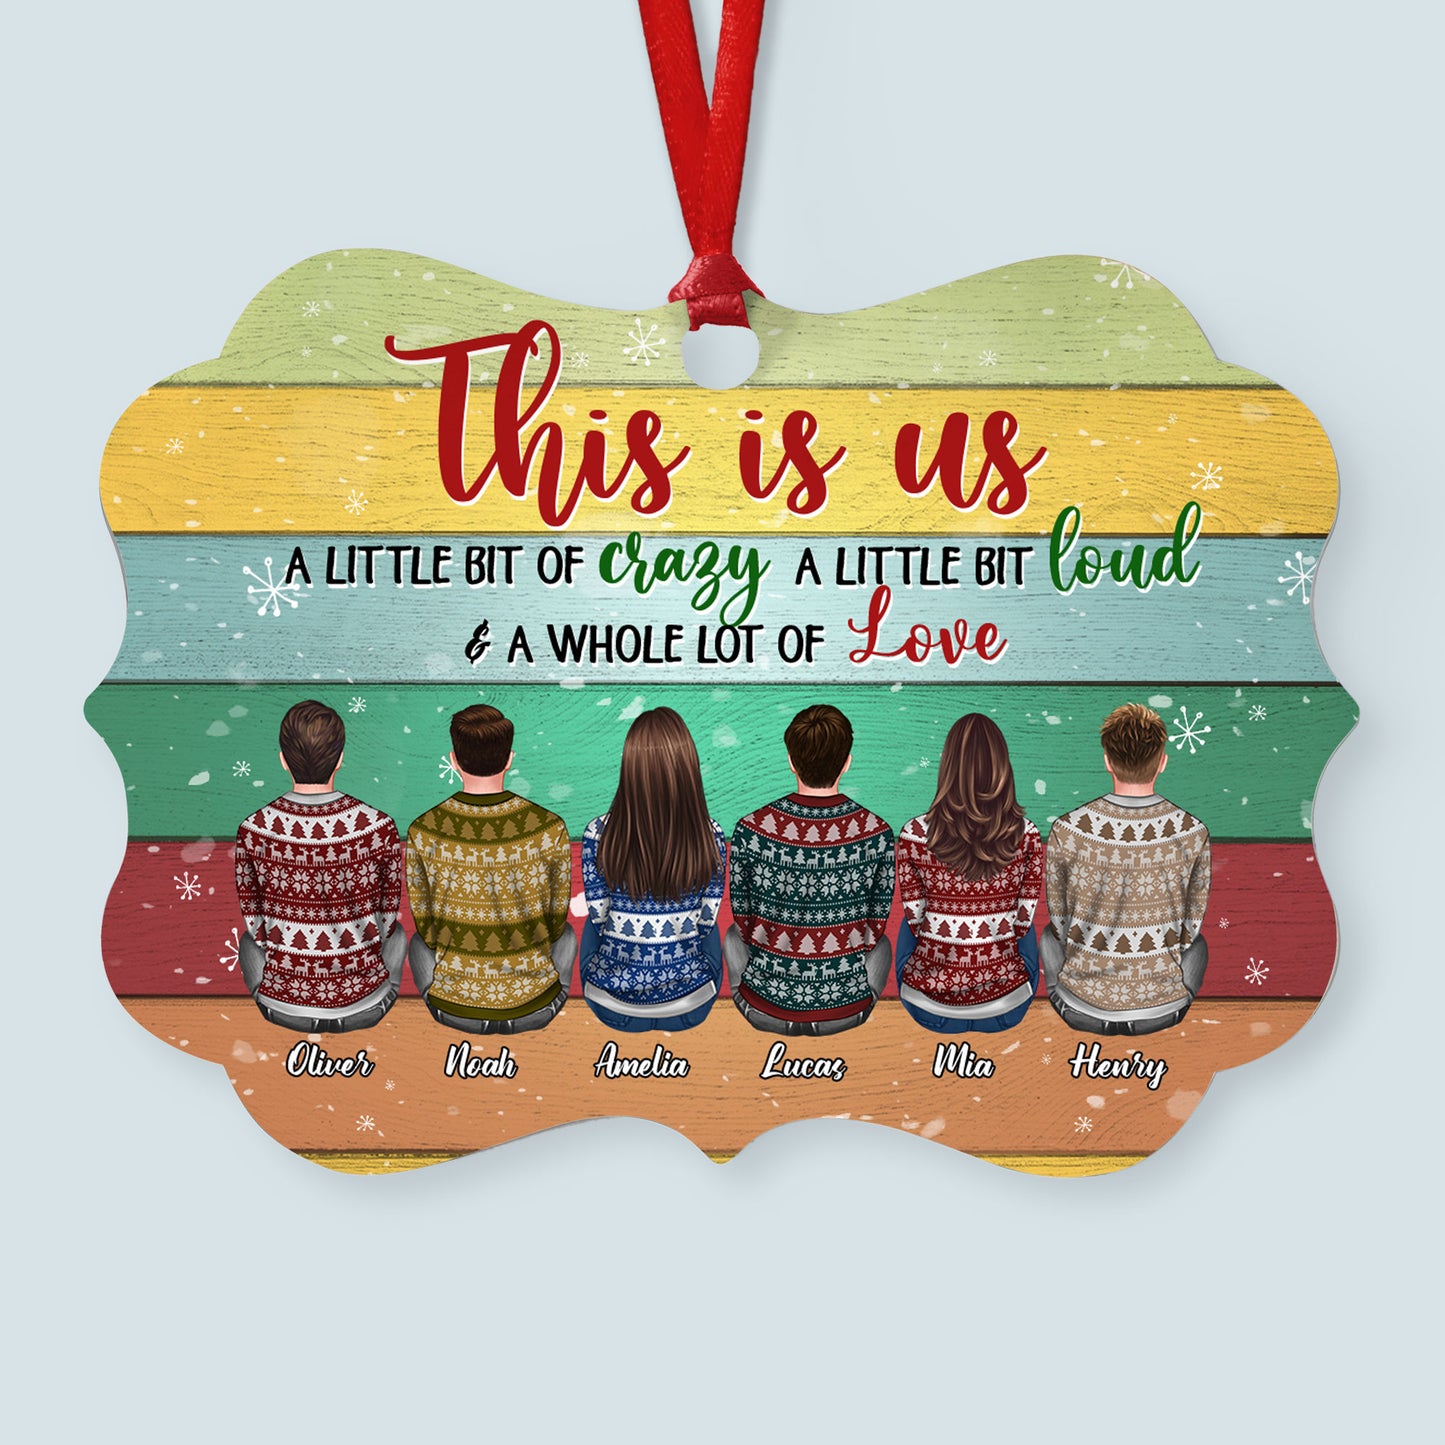 This Is Us A Little Bit Crazy - Personalized Aluminum Ornament - Christmas Gift Family Ornament For Besties, Siblings